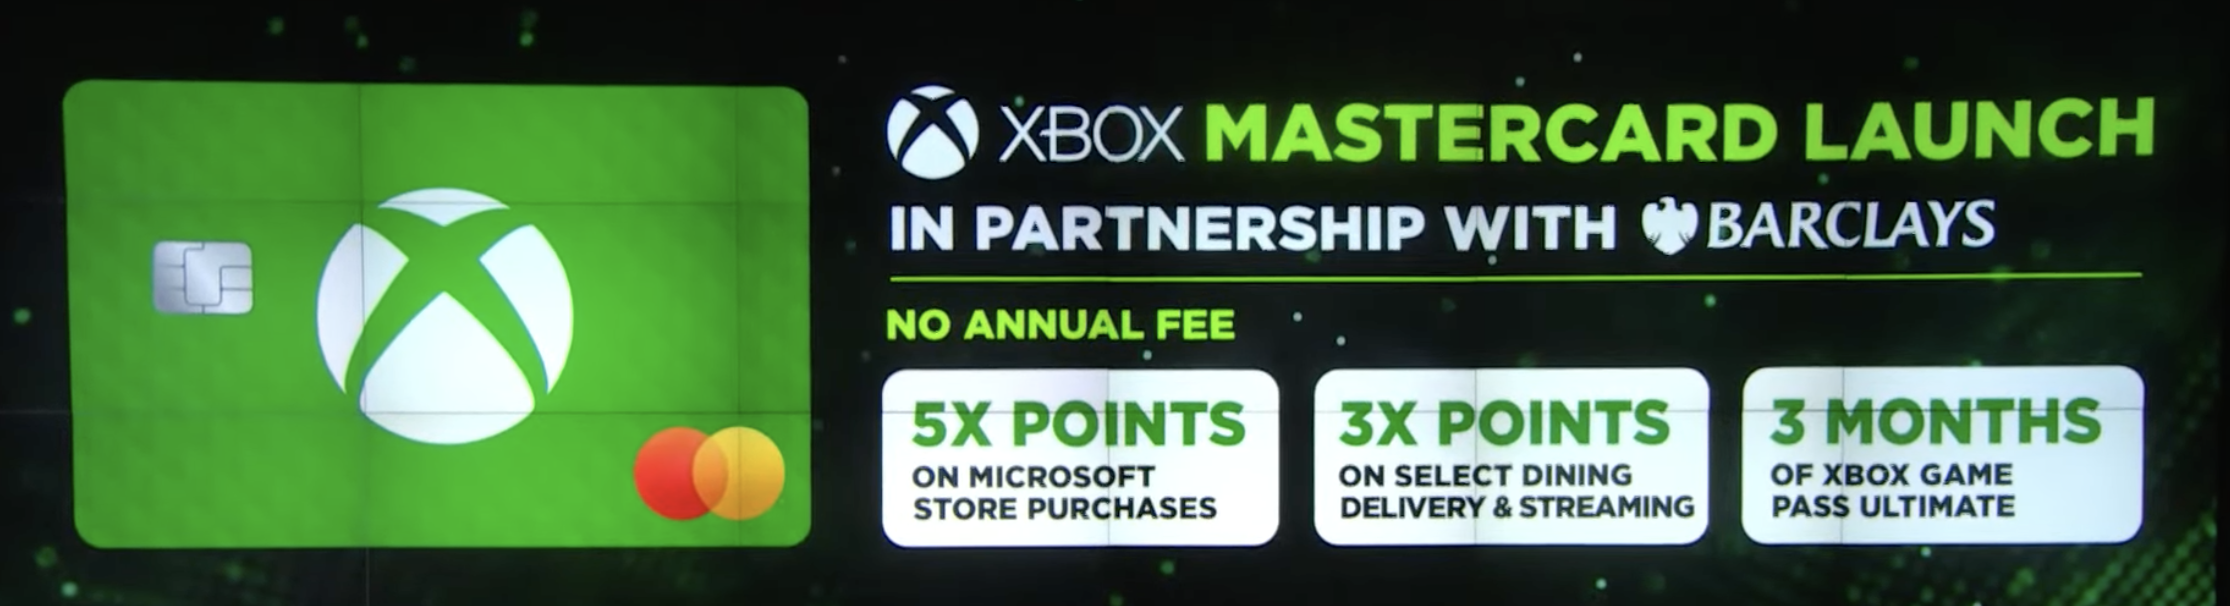 Xbox to Launch the Xbox Mastercard, Its First-Ever Credit Card in the US,  Issued by Barclays